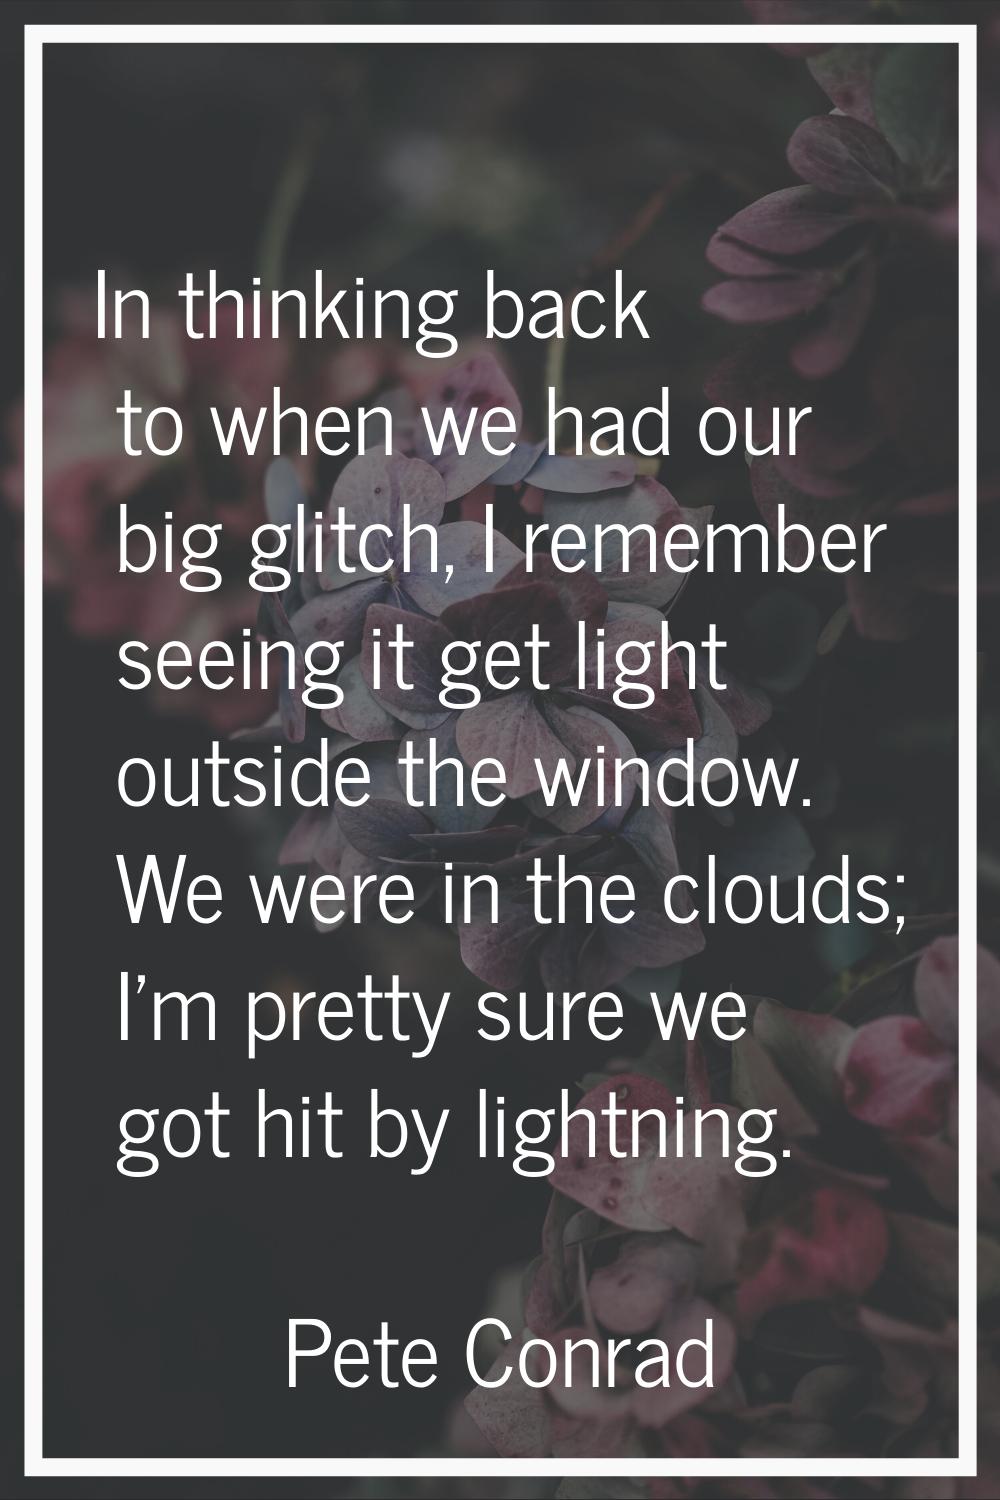 In thinking back to when we had our big glitch, I remember seeing it get light outside the window. 